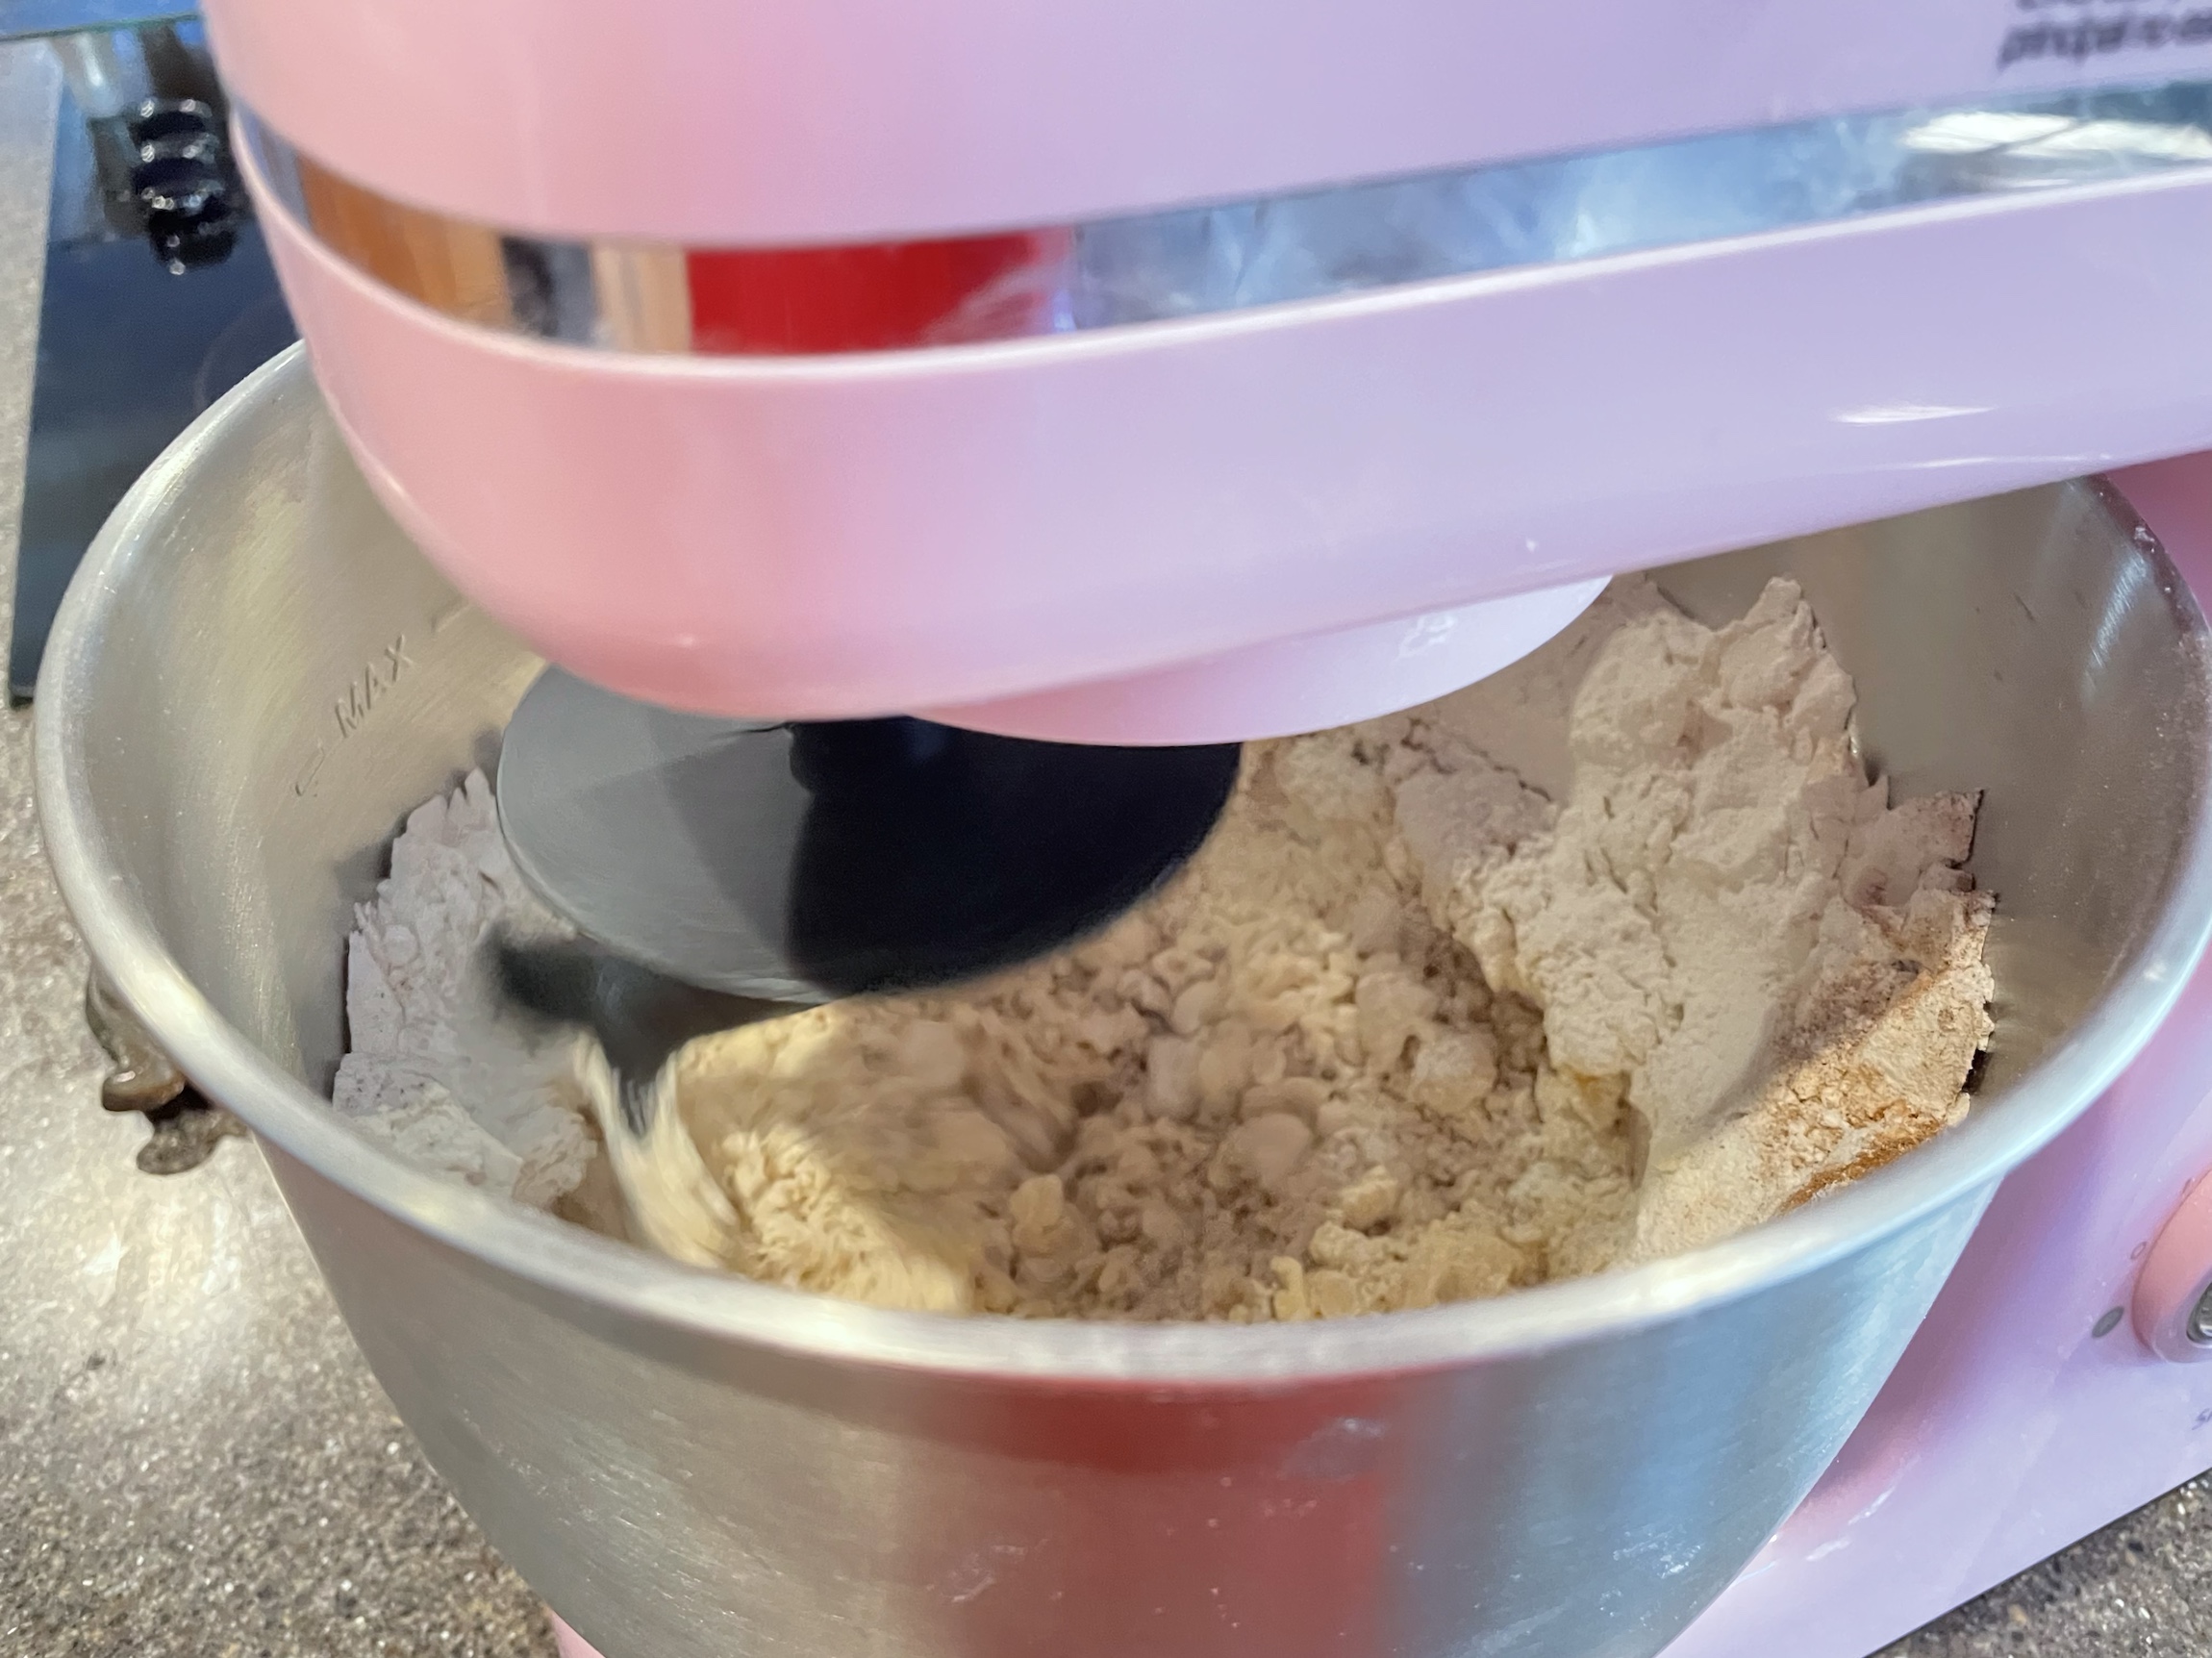 Mix flour mixture until well combined